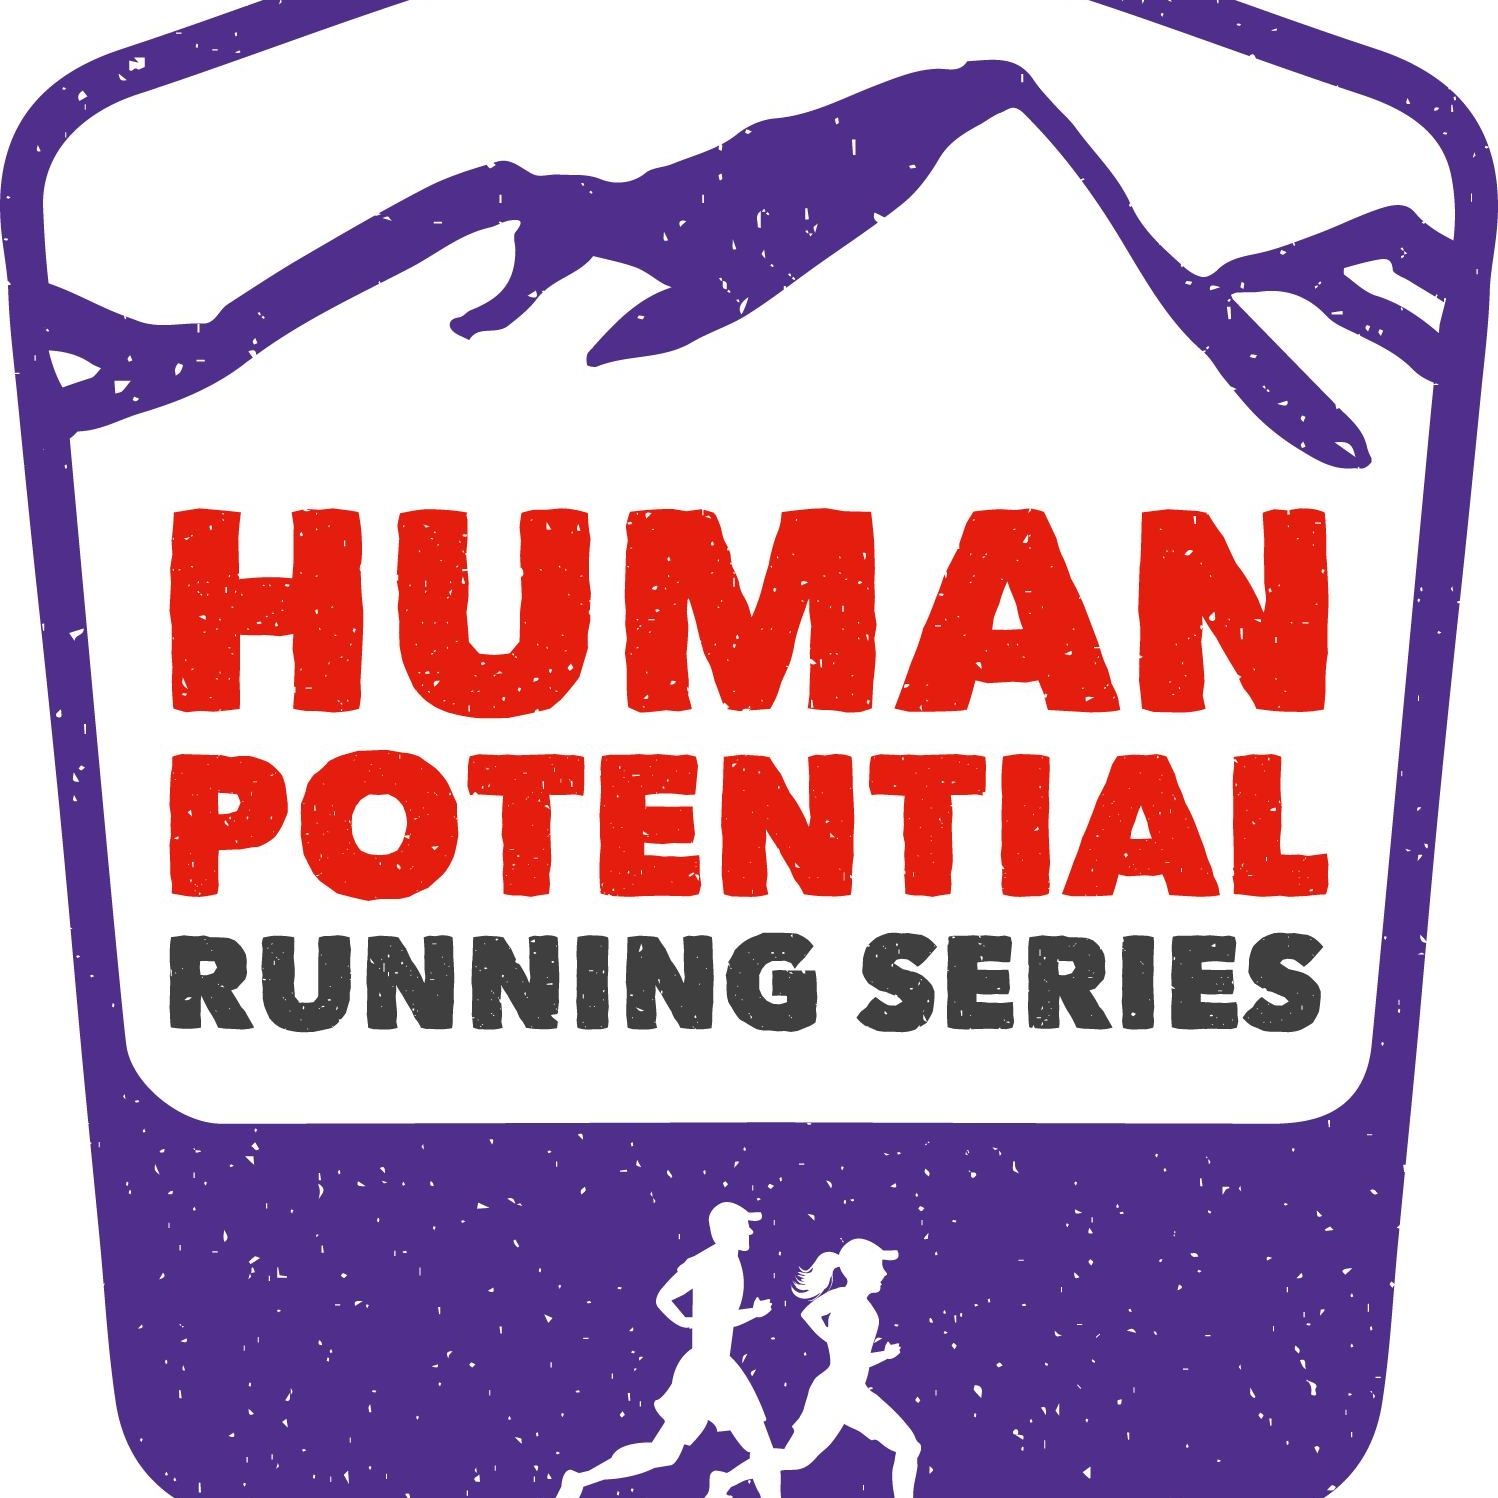 The Human Potential Running Series